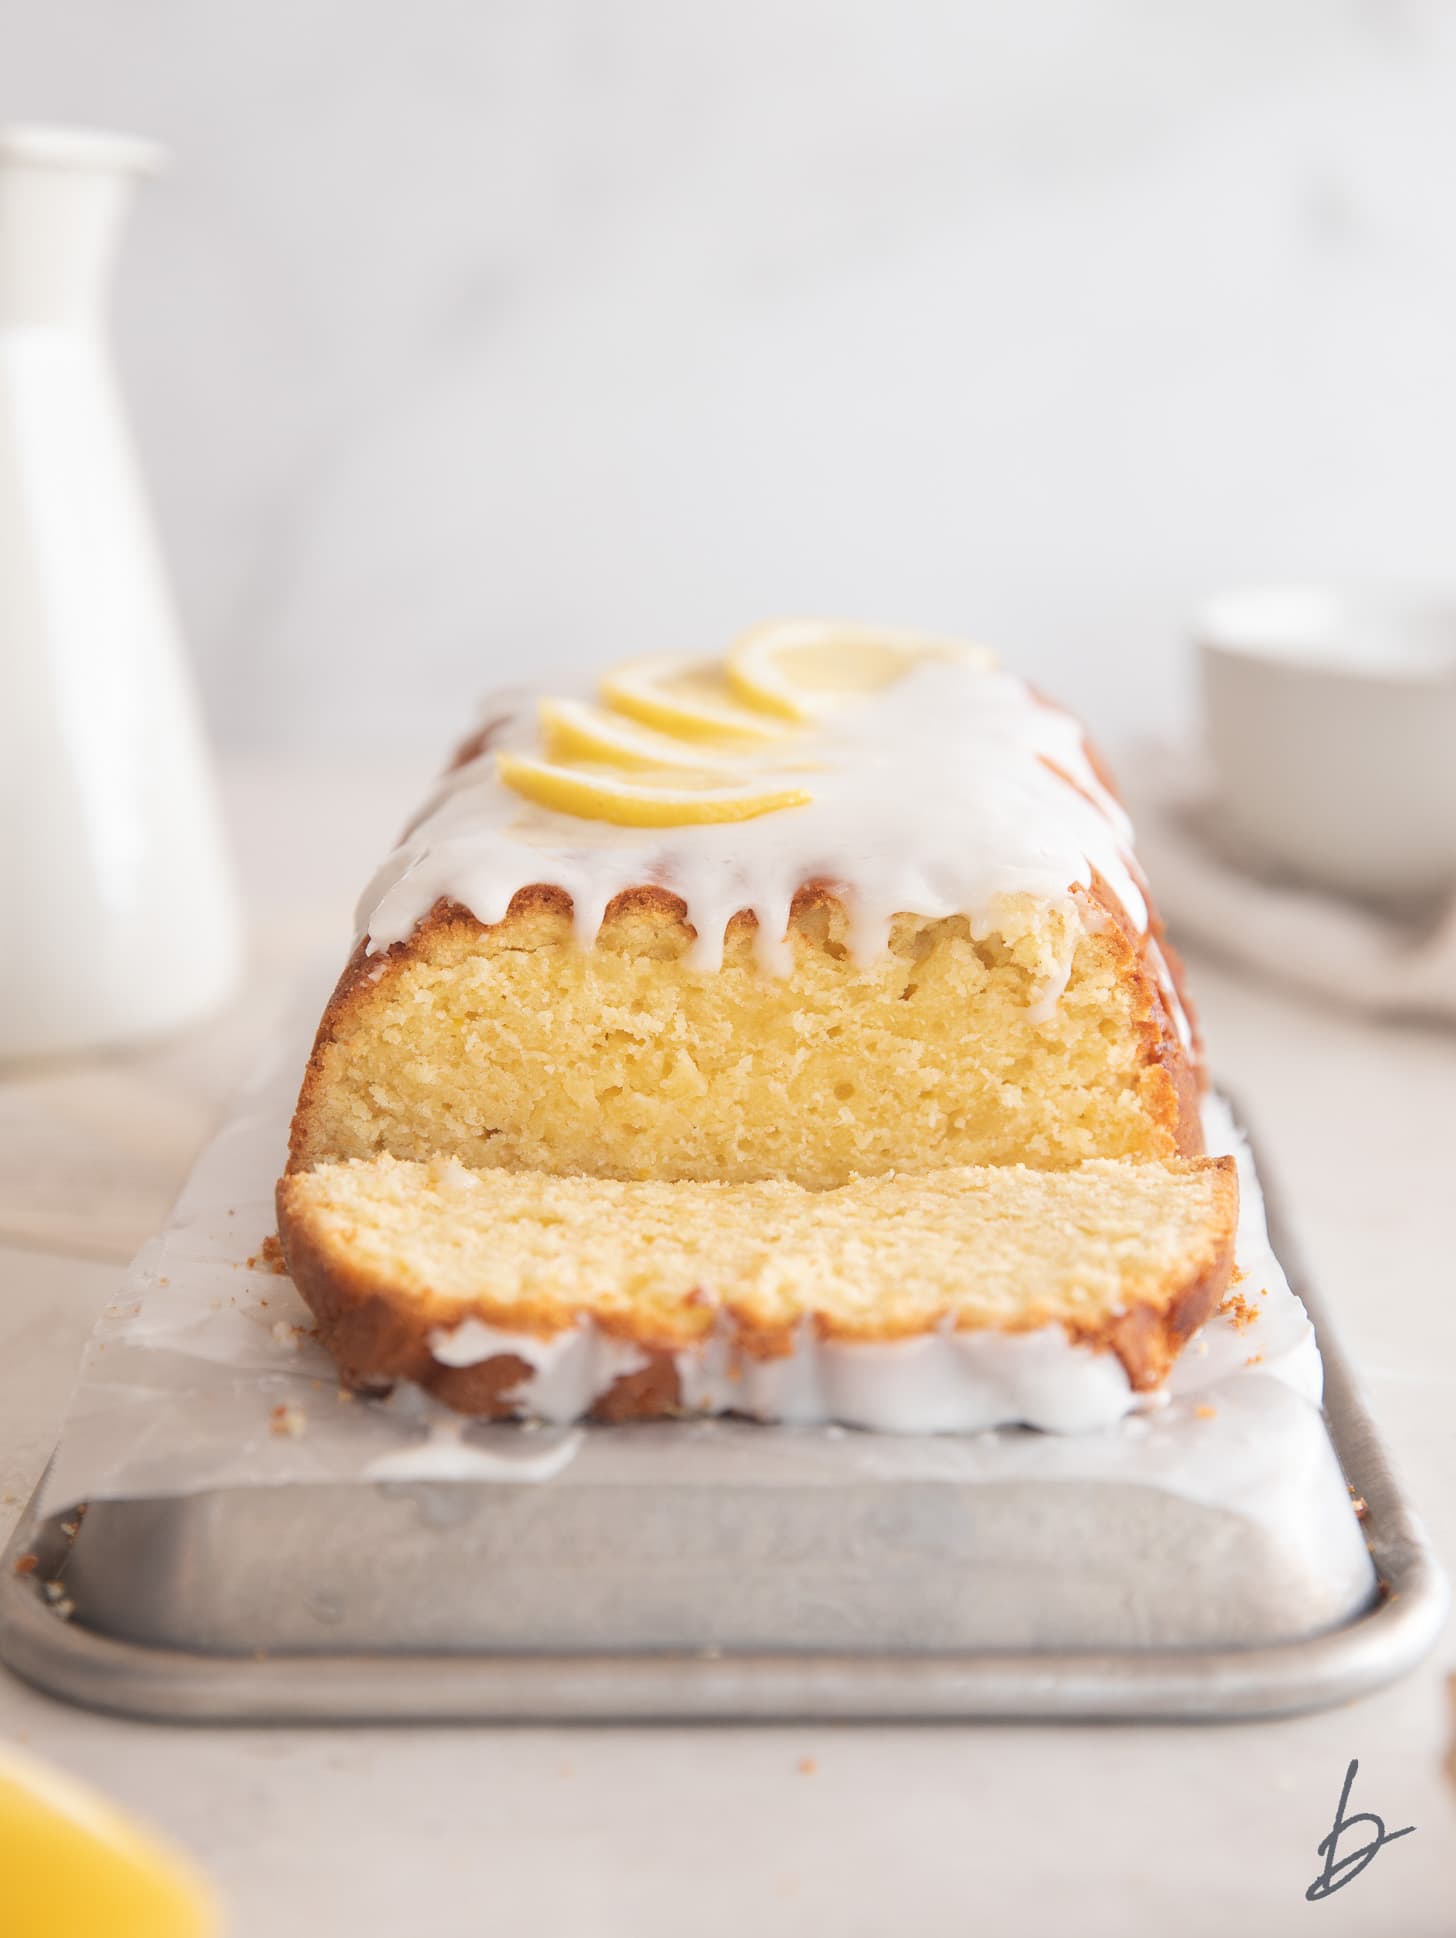 lemon pound cake with icing and slice cut off the end showing inside of loaf